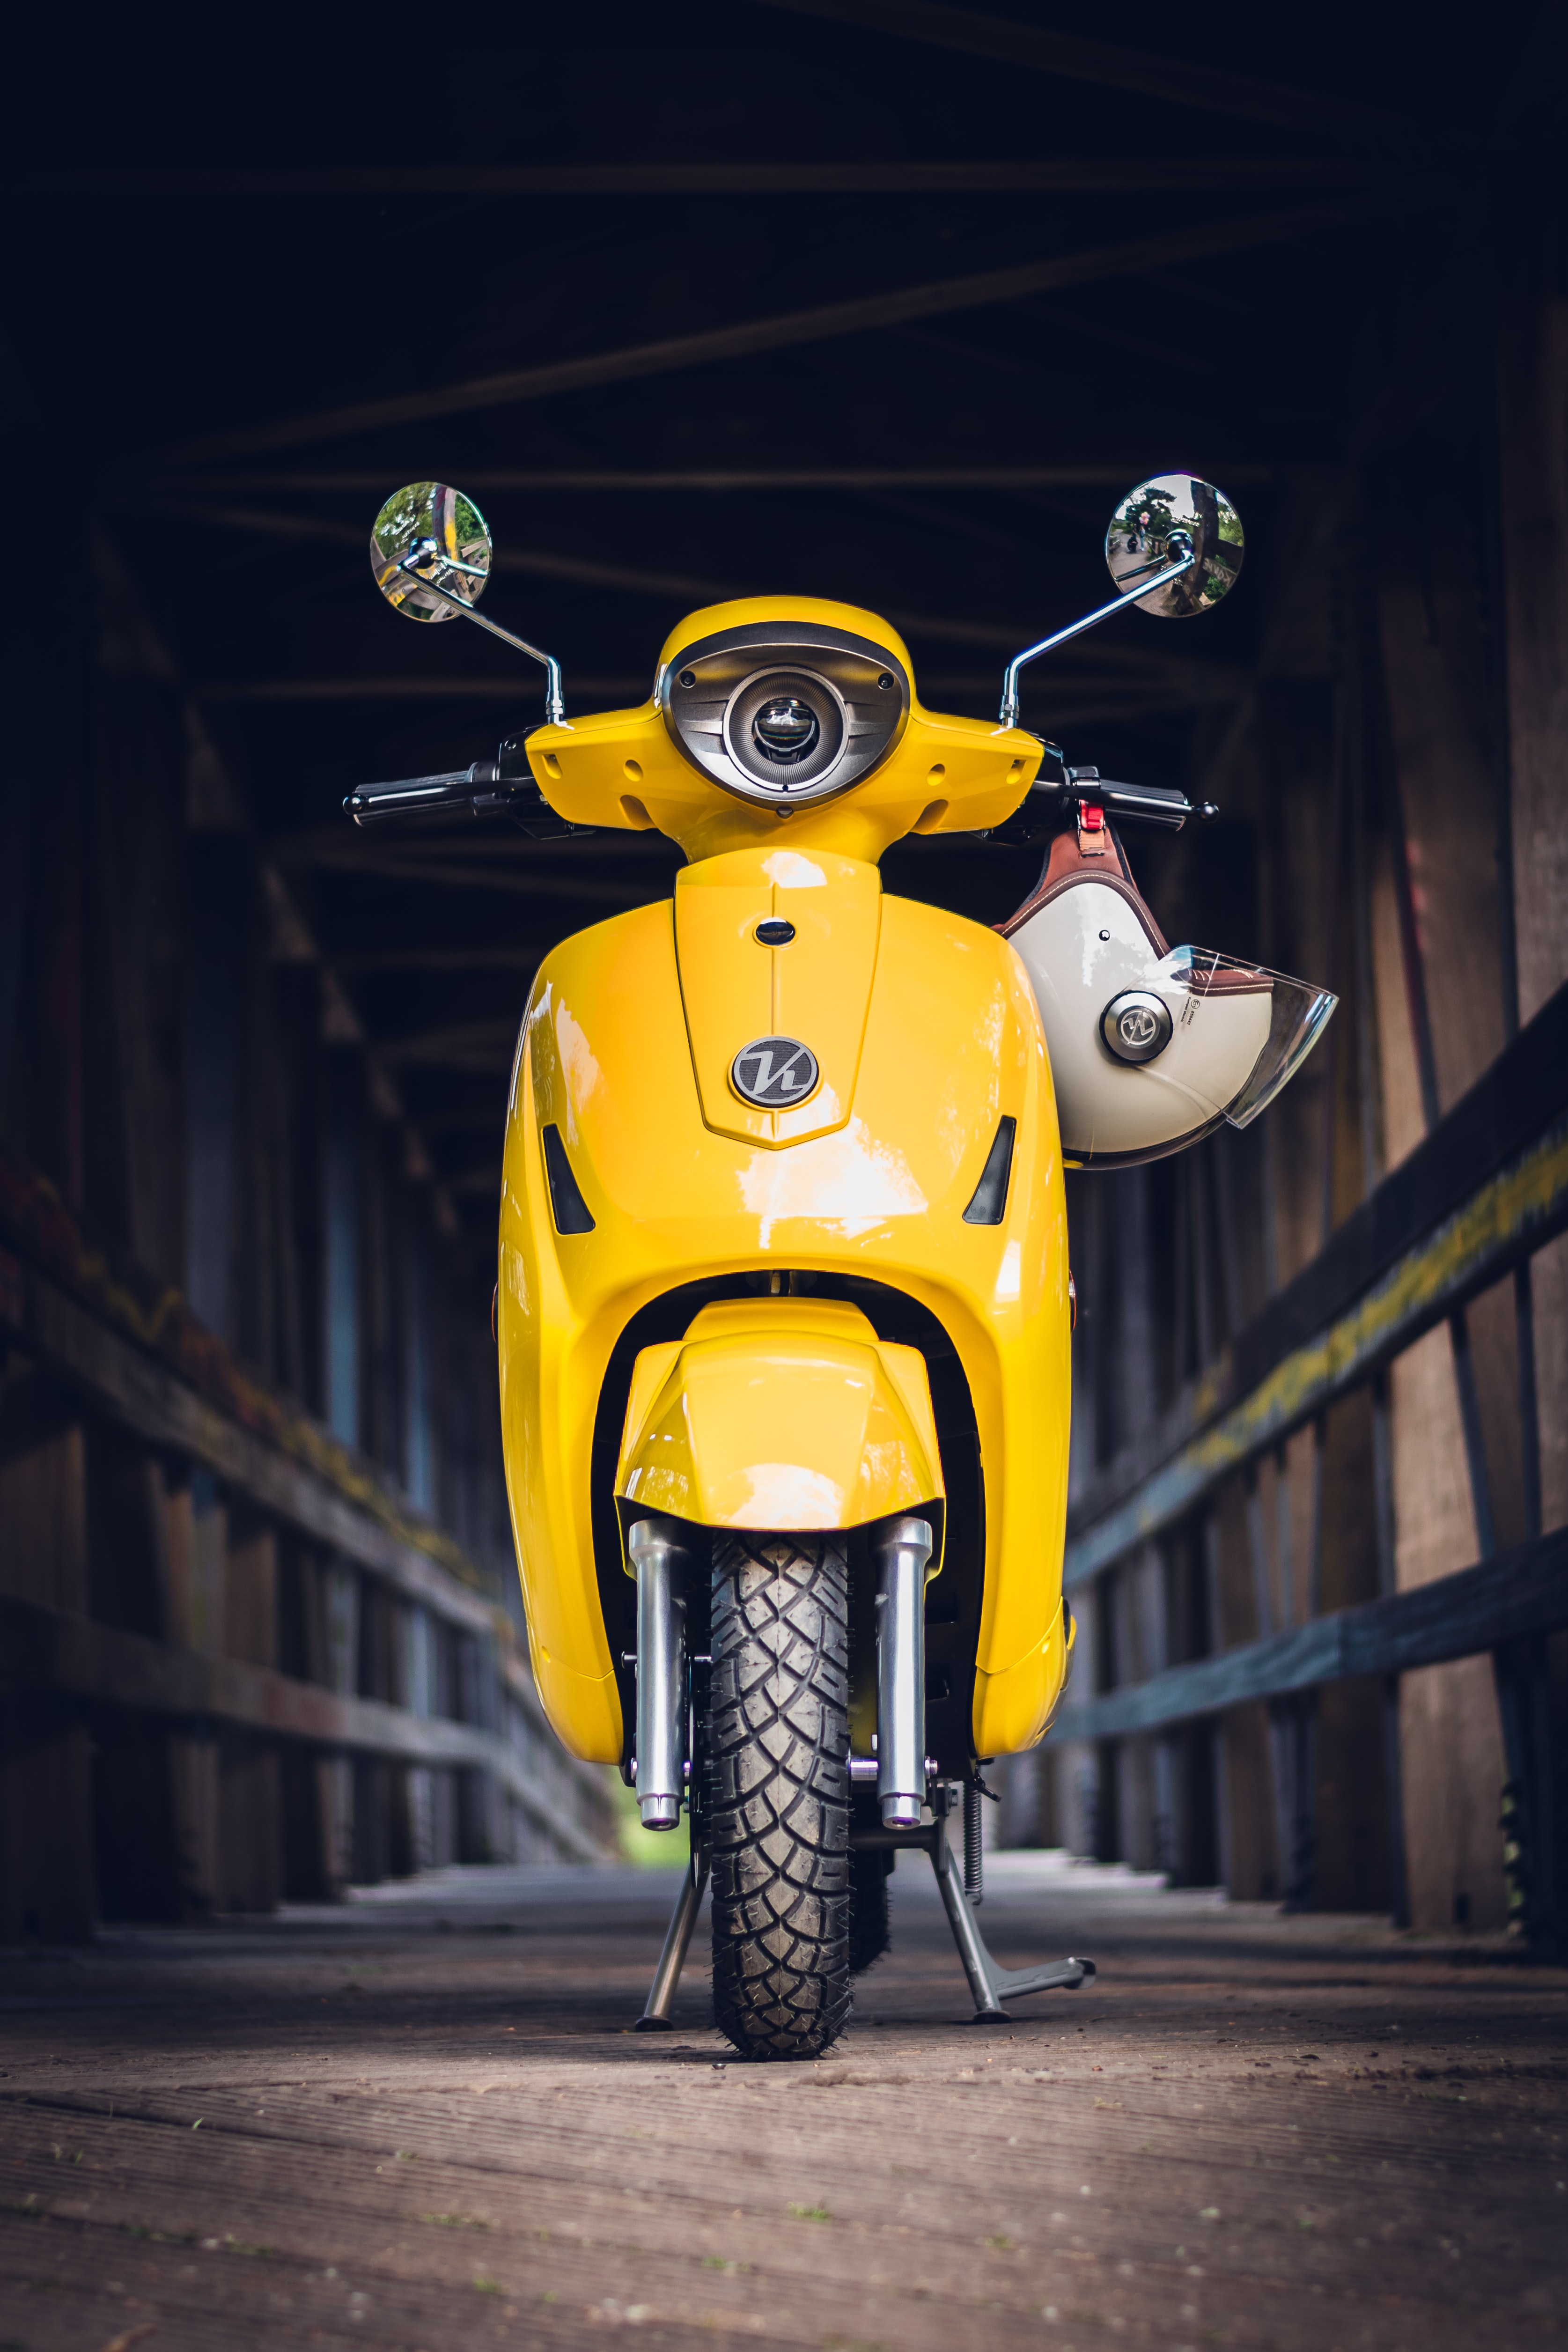 moped, yellow, motorcycles, front view, helmet, scooter wallpapers for tablet